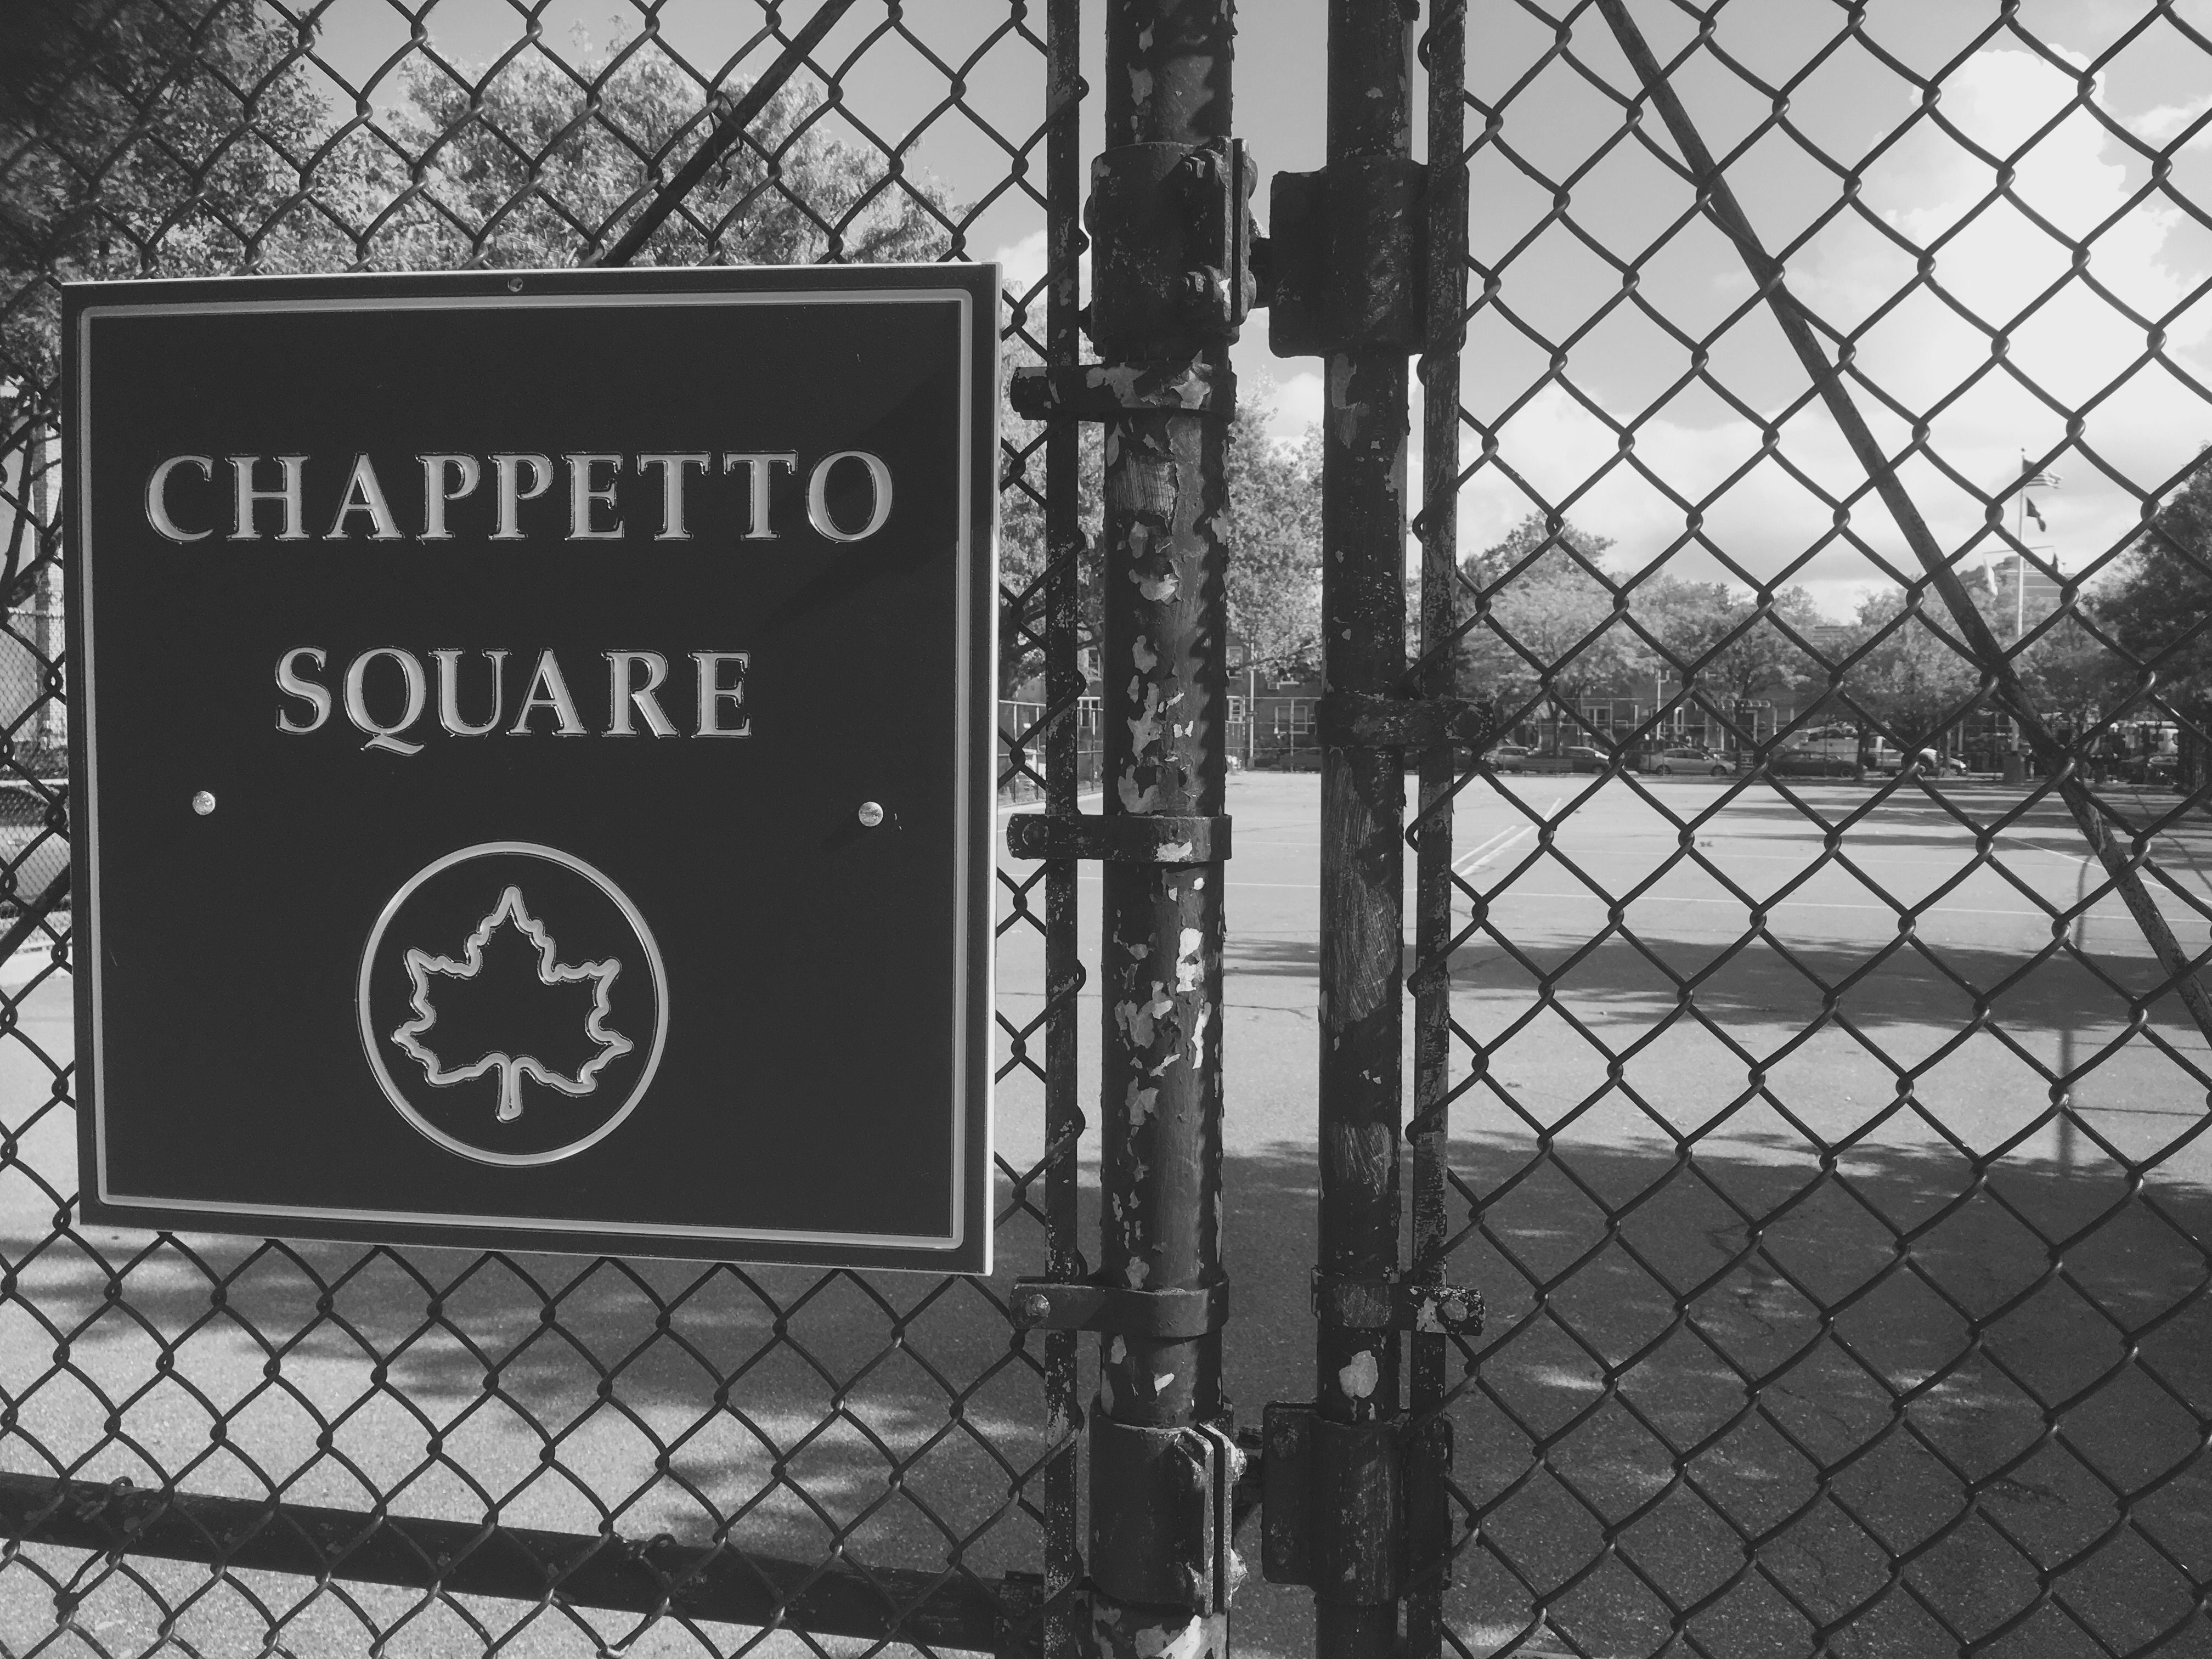 Chappetto Square Joins the Community Parks Initiative